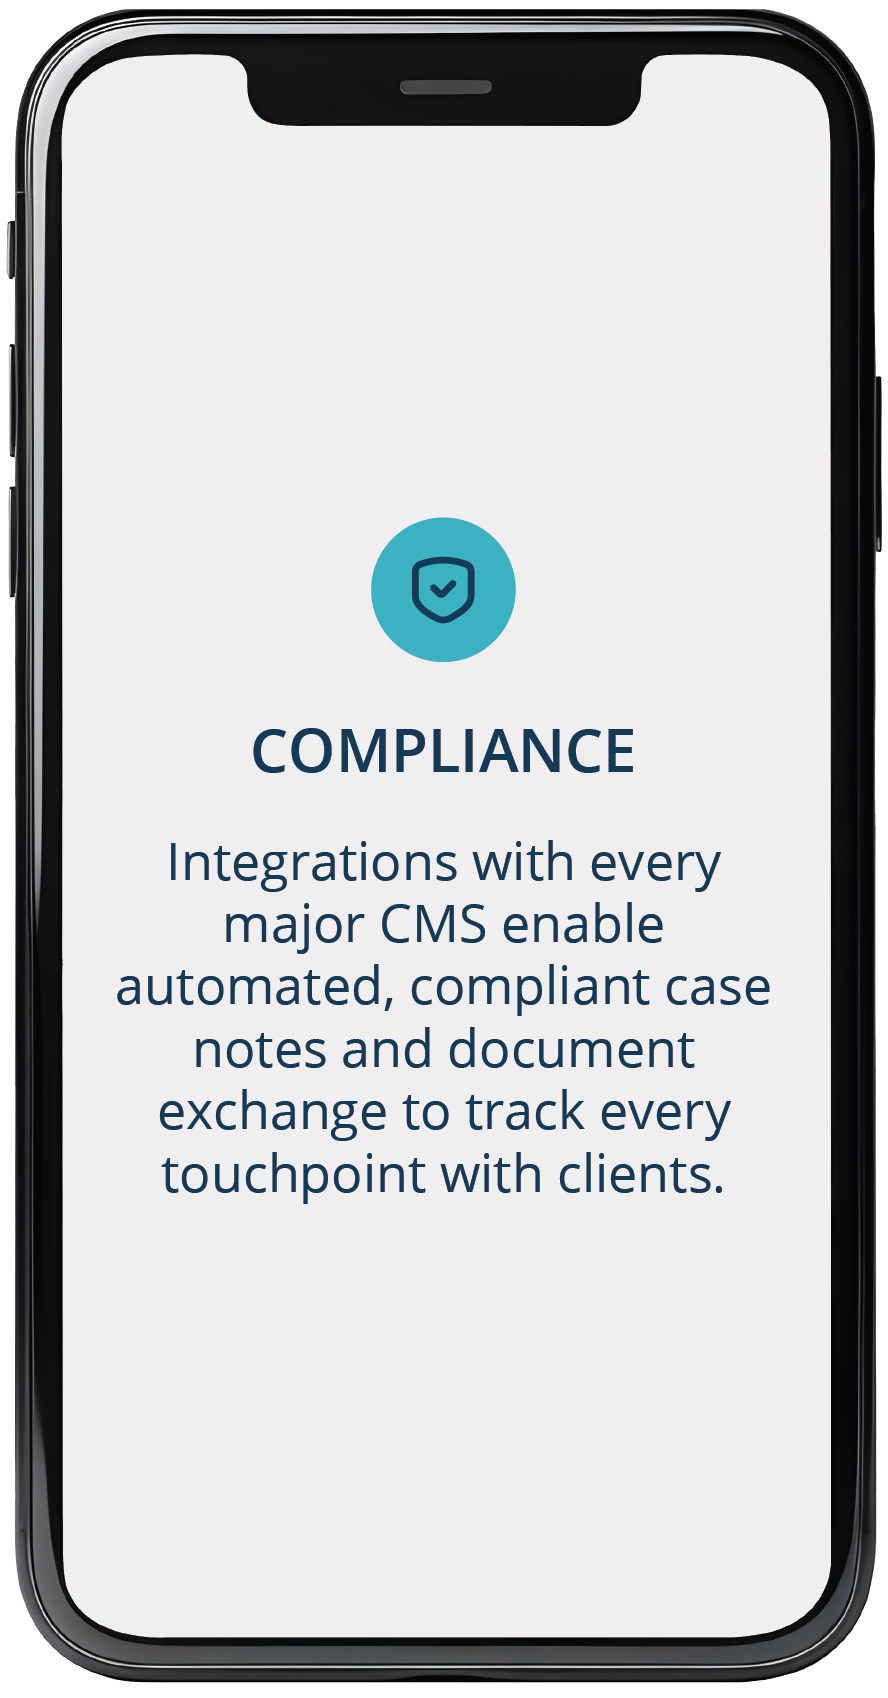 Integrations with every major CMS enable automated, compliant case notes and document exchange to track every touchpoint with clients.